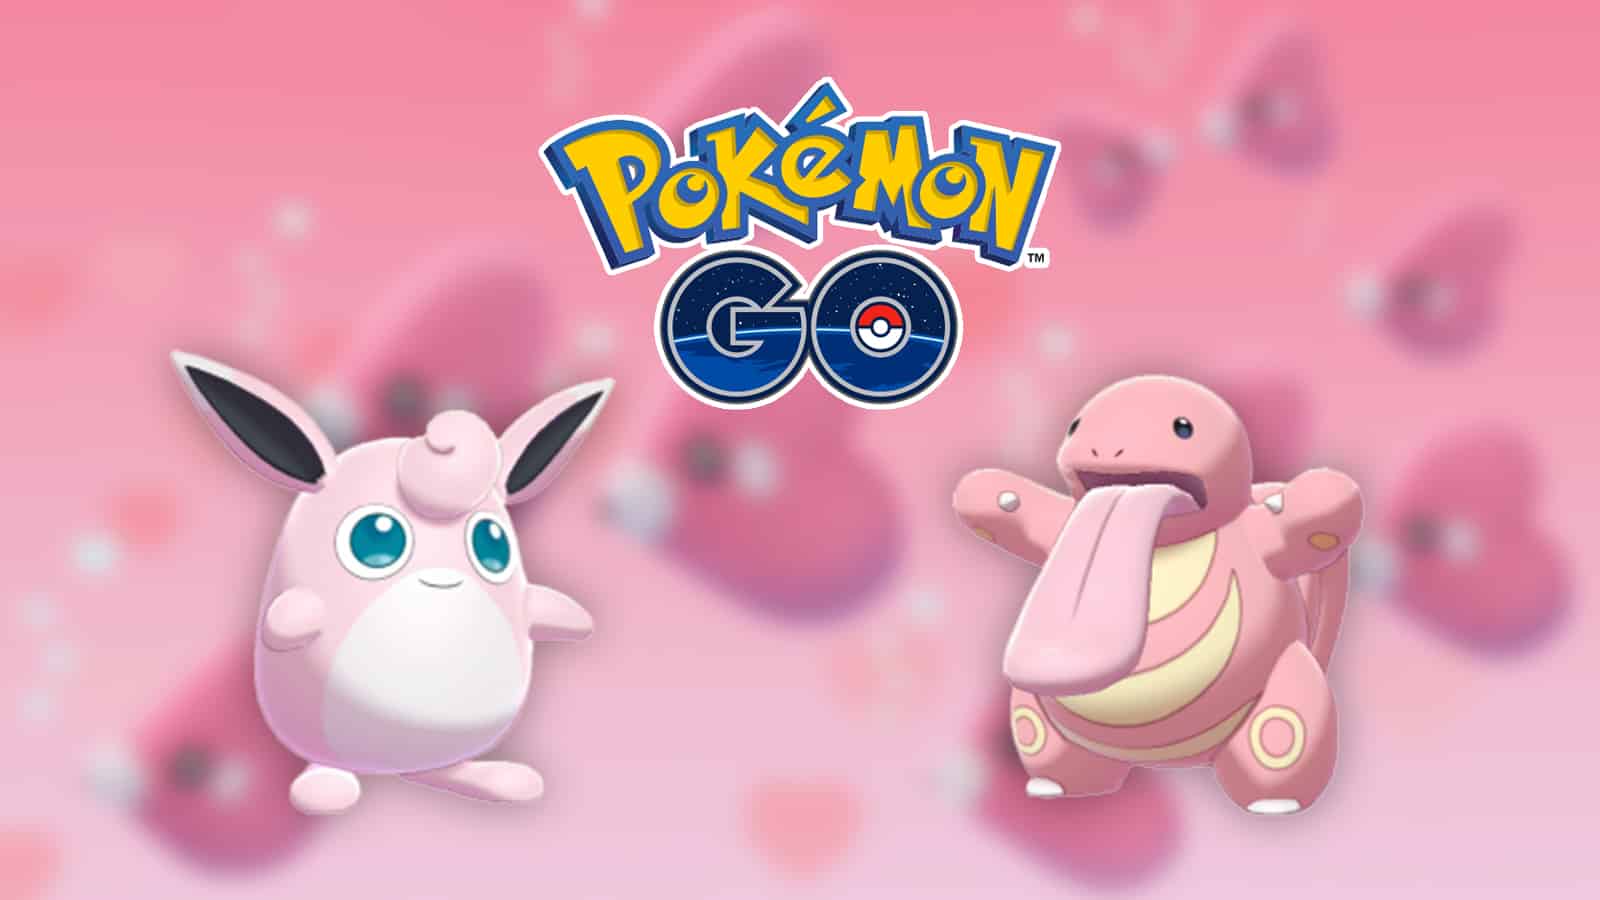 Wigglytuff and Lickitung as part of the best Love Cup team in Pokemon Go